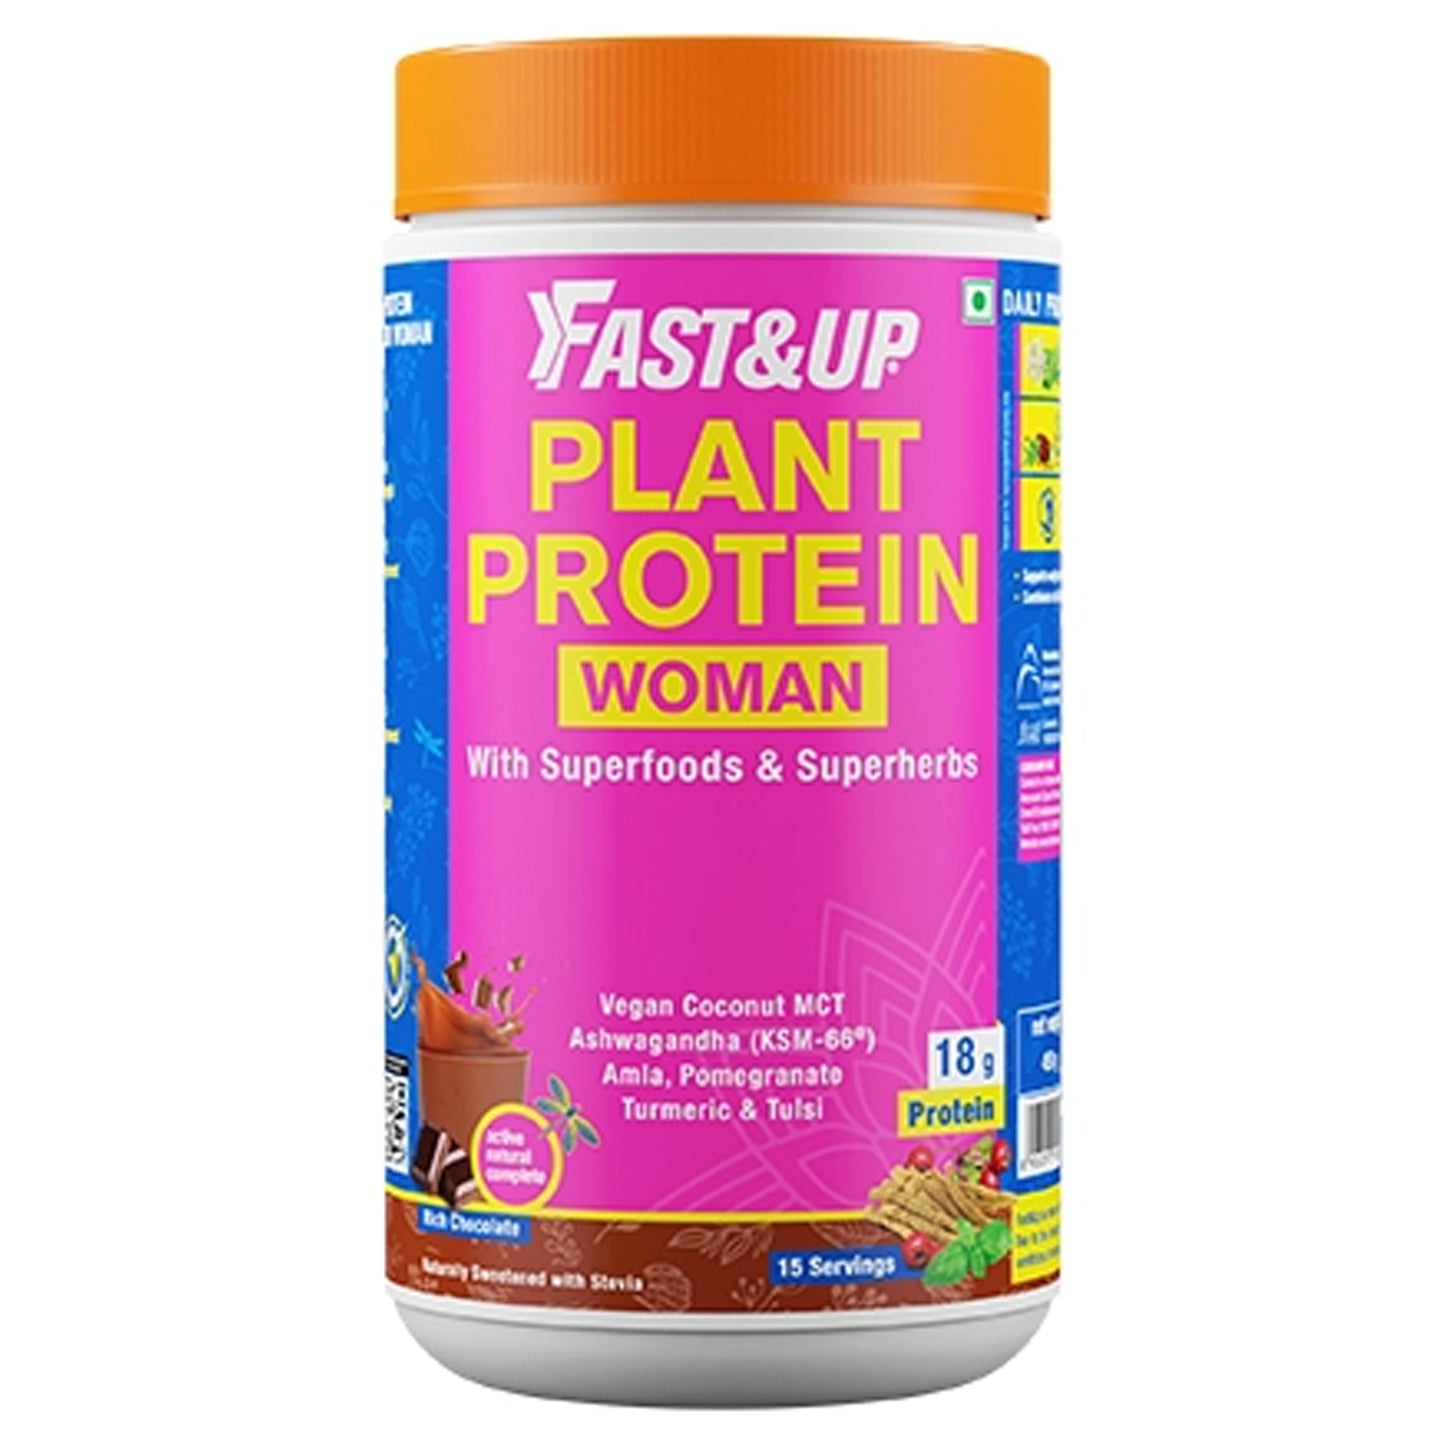 Fast&Up Plant Protein and Superfood Chocolate for Women, 450gm